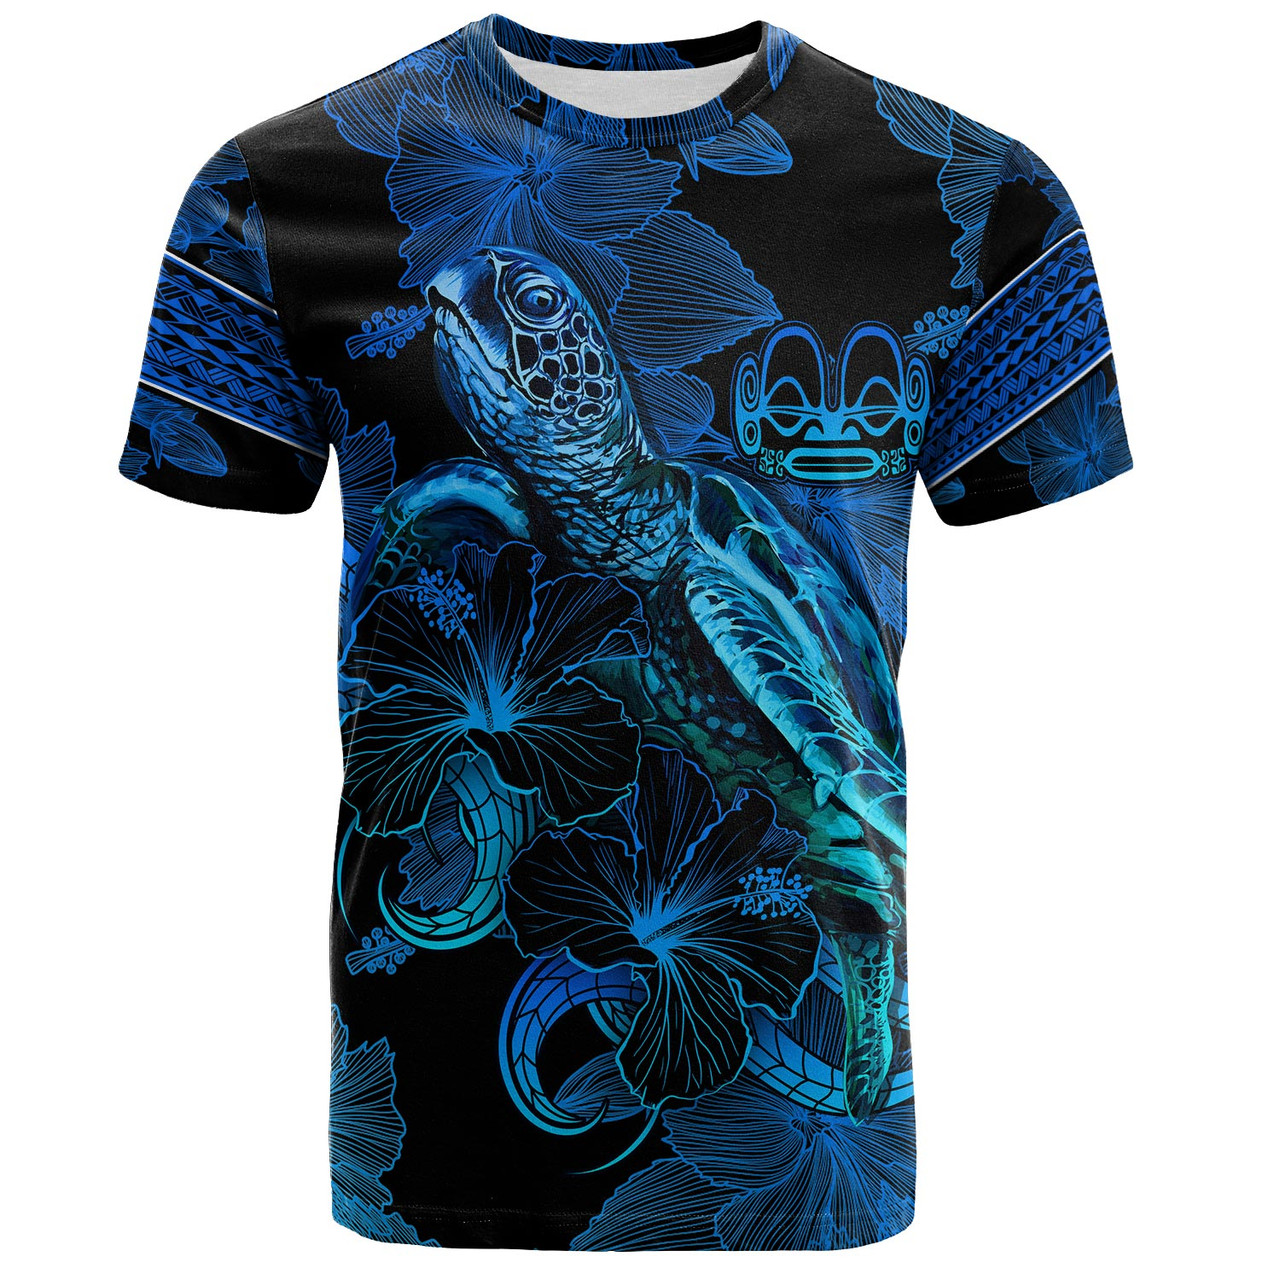 Marquesas Islands T-Shirt Sea Turtle With Blooming Hibiscus Flowers Tribal Blue